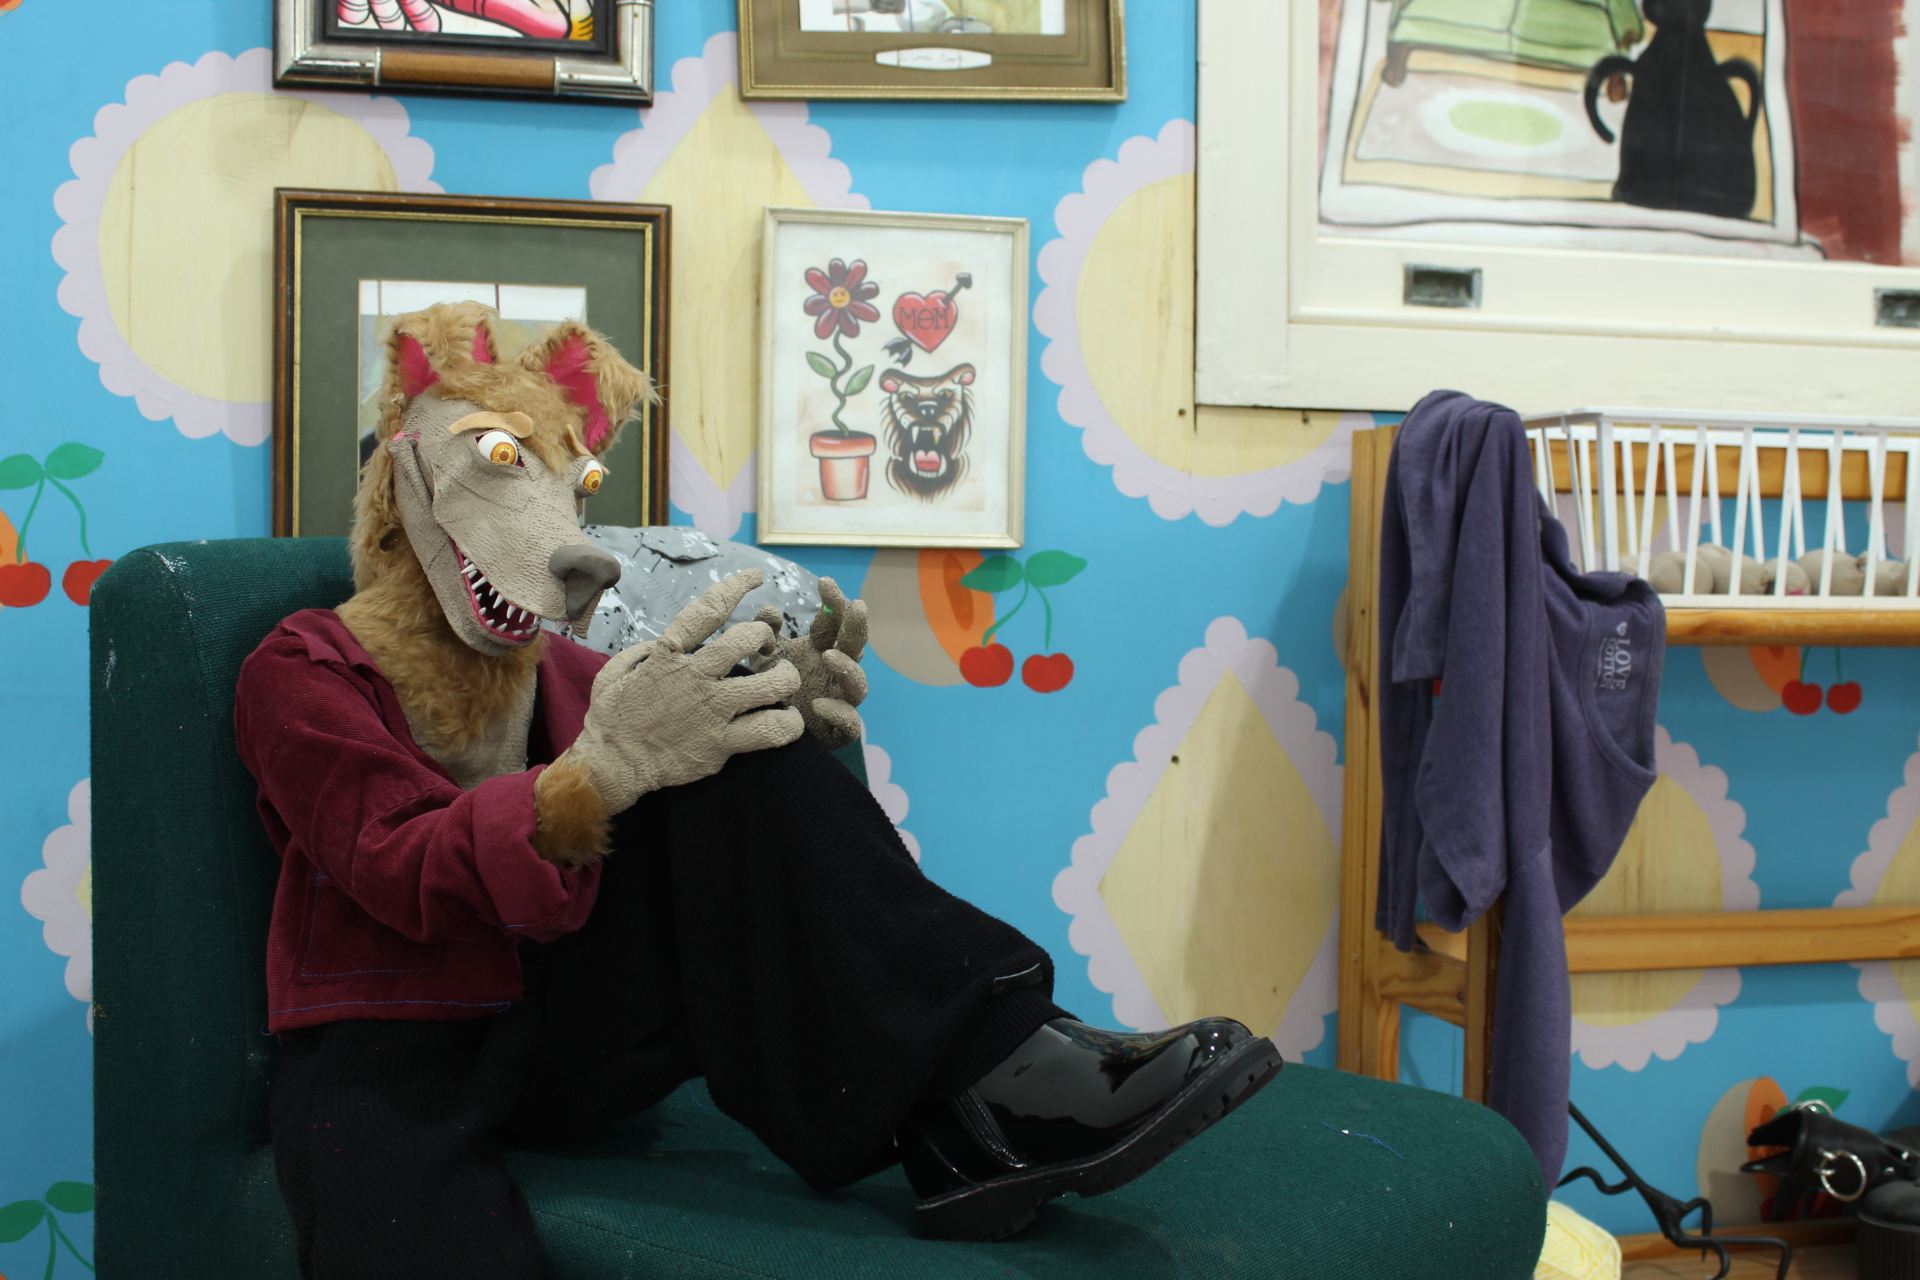 A wolf puppet sits nervously in a colourful room with his hands resting on his knees.